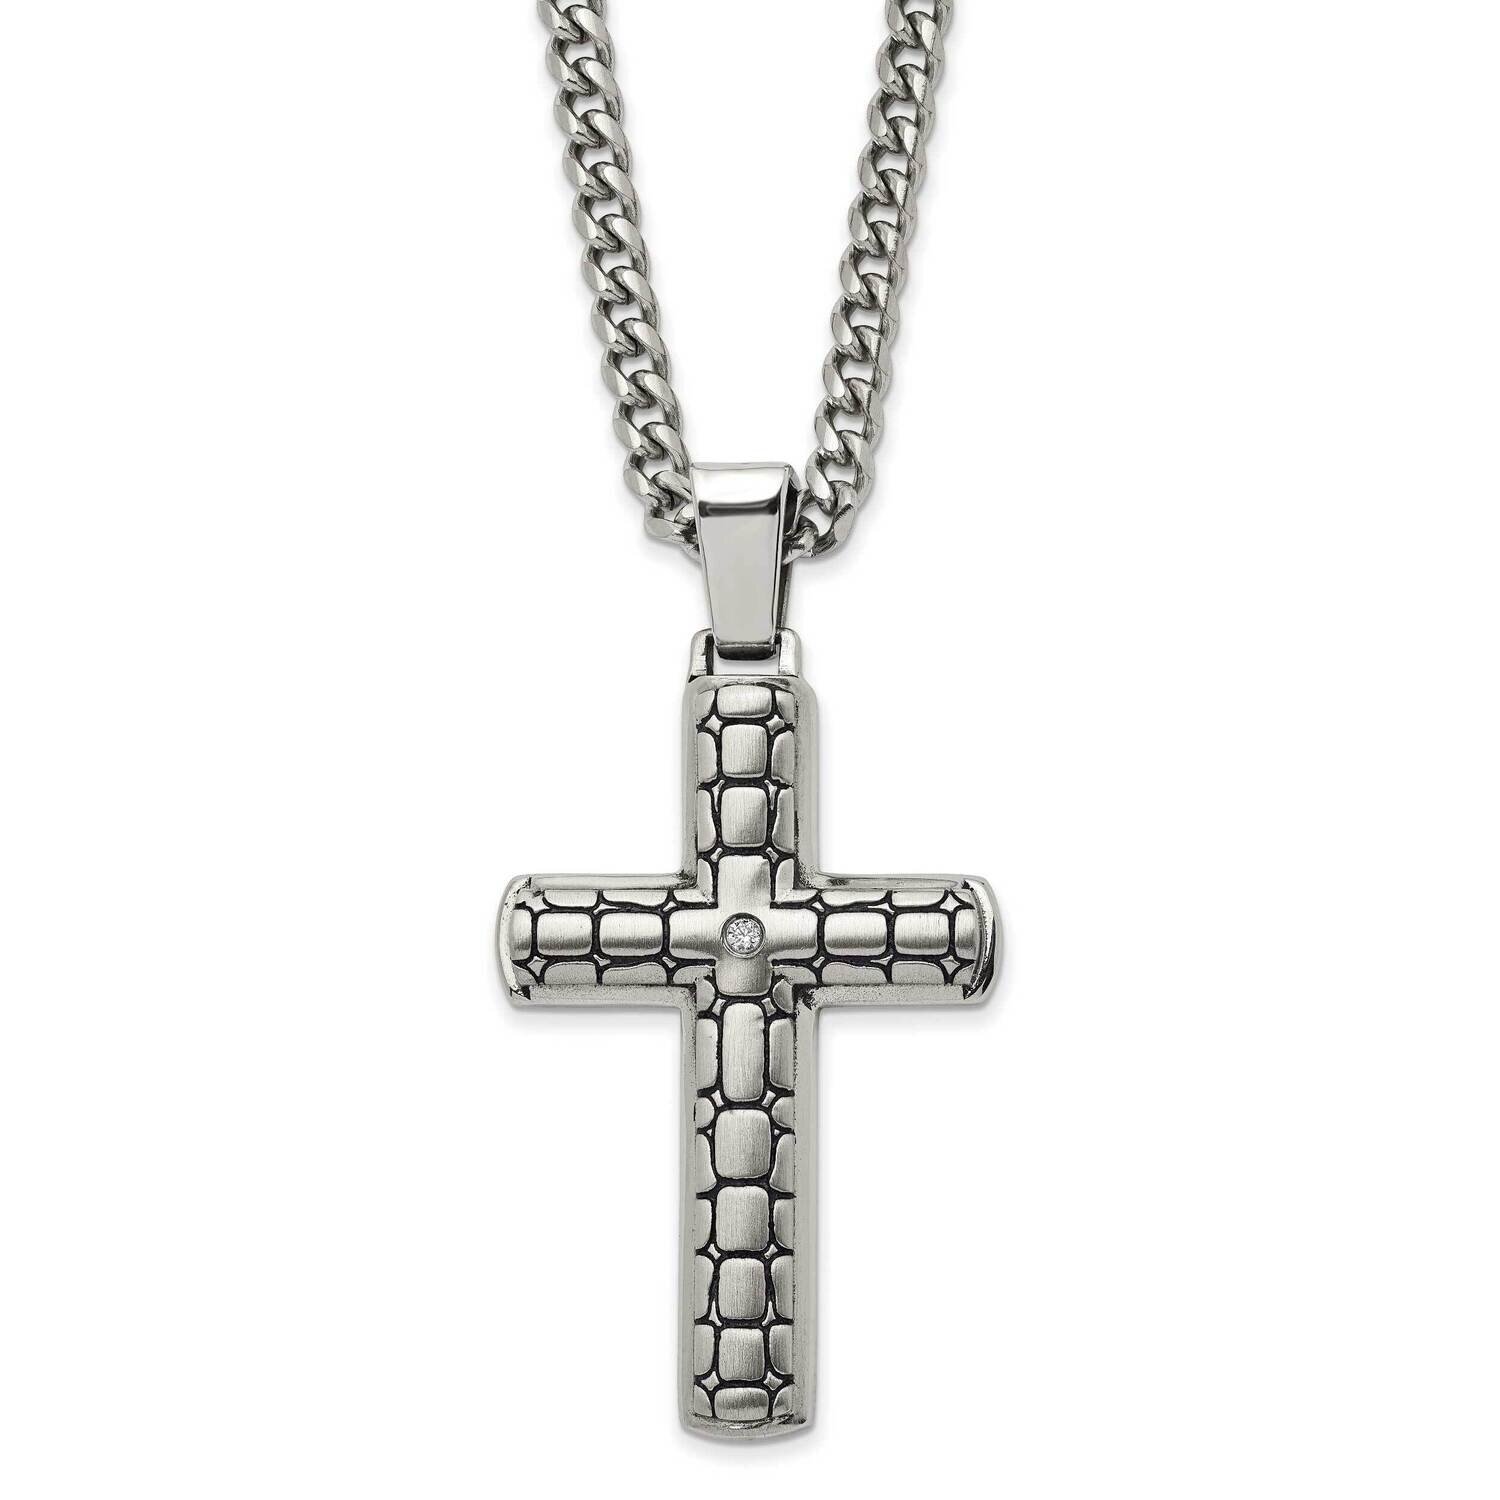 Antiqued Brushed & Polished with CZ Diamond Cross 24 Inch Necklace Stainless Steel SRN2841-24